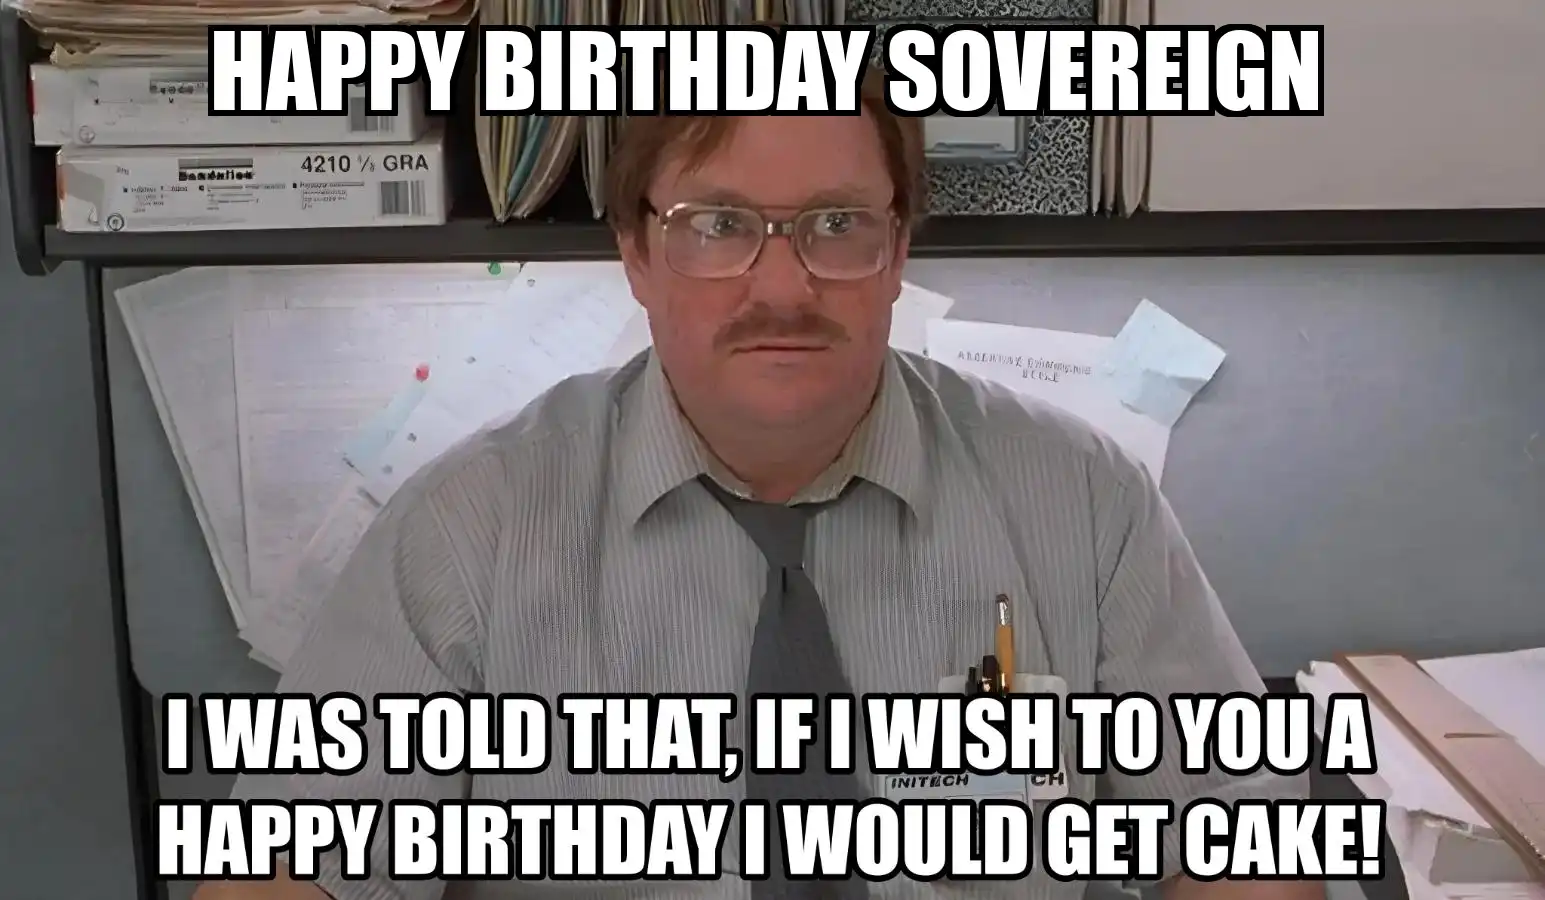 Happy Birthday Sovereign I Would Get A Cake Meme